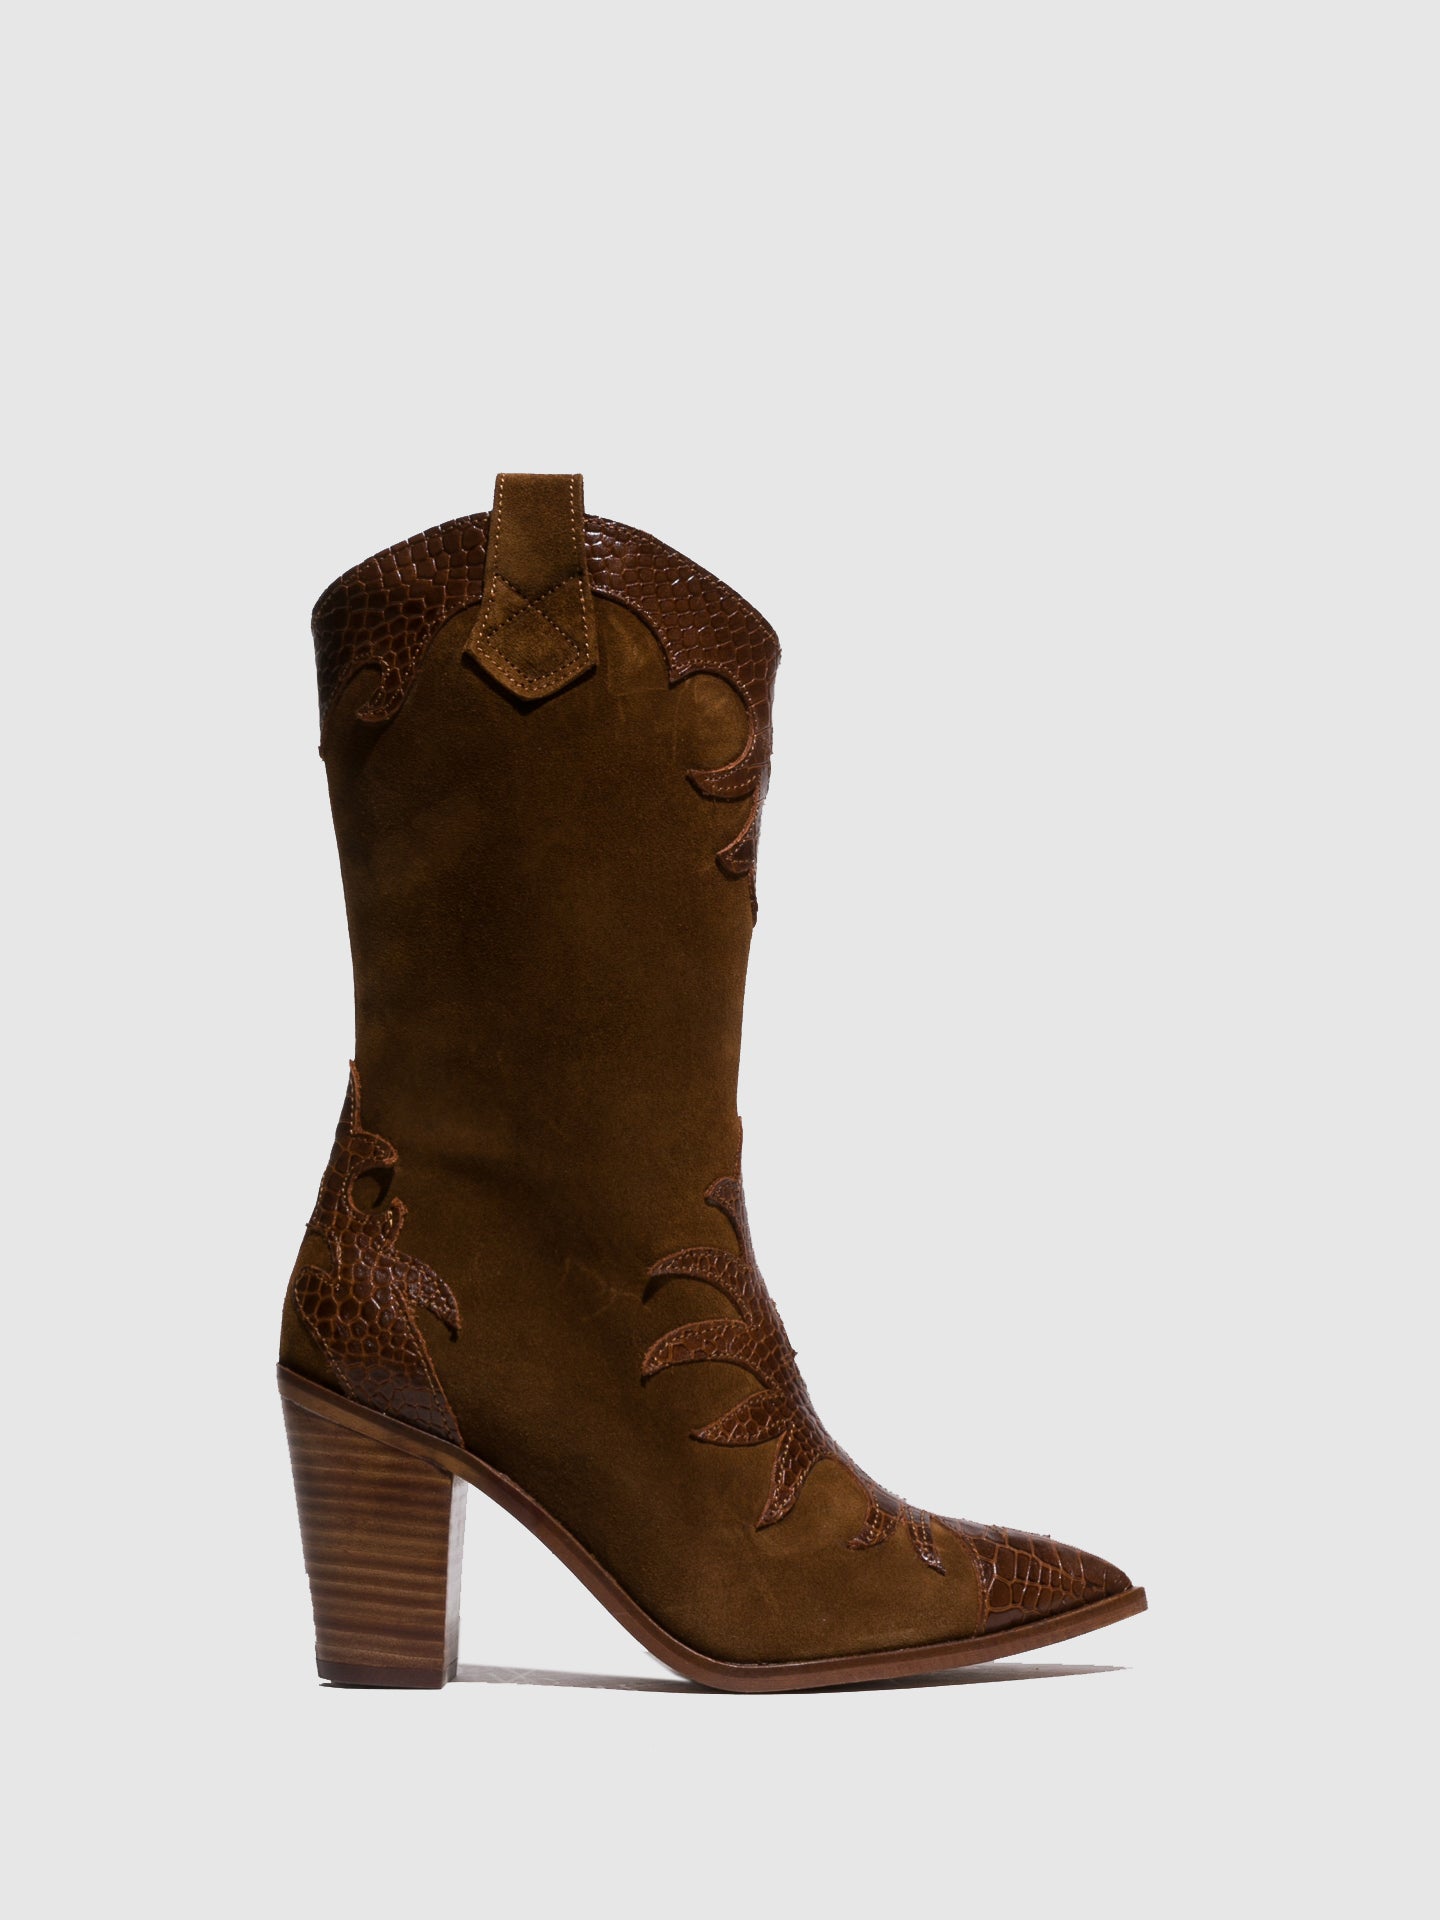 Foreva Brown Pointed Toe Boots